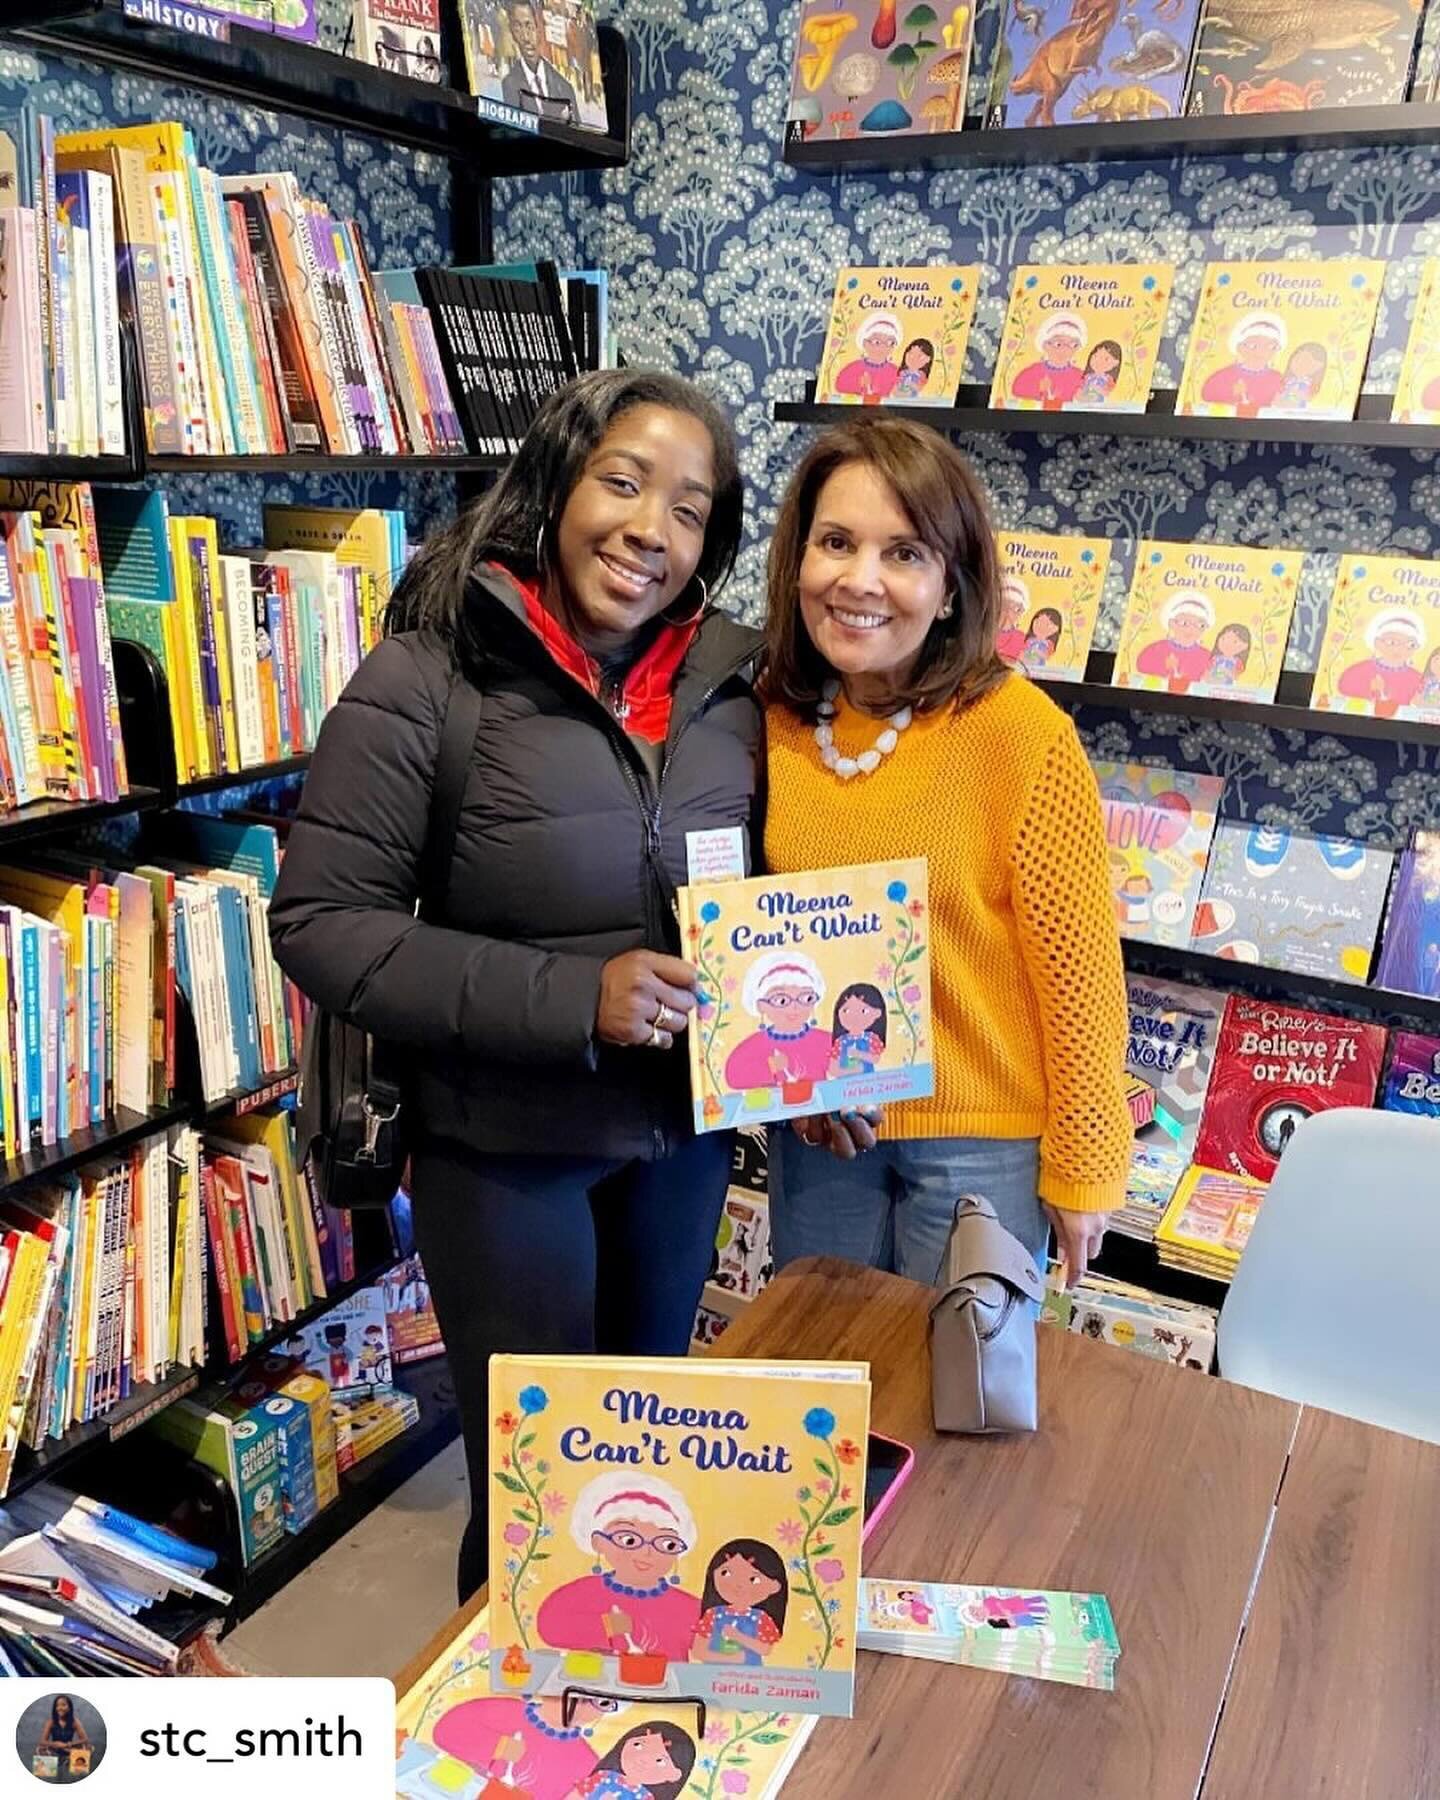 Sharing this lovely post by my author friend @stc_smith 
Thank you for being part of the celebration for the arrival of Meena Can&rsquo;t Wait! 🙏🏽💕💕
.
.
.
 ***BOOK LAUNCH*** Yesterday, I attended the book launch for MEENA CAN&rsquo;T WAIT by auth